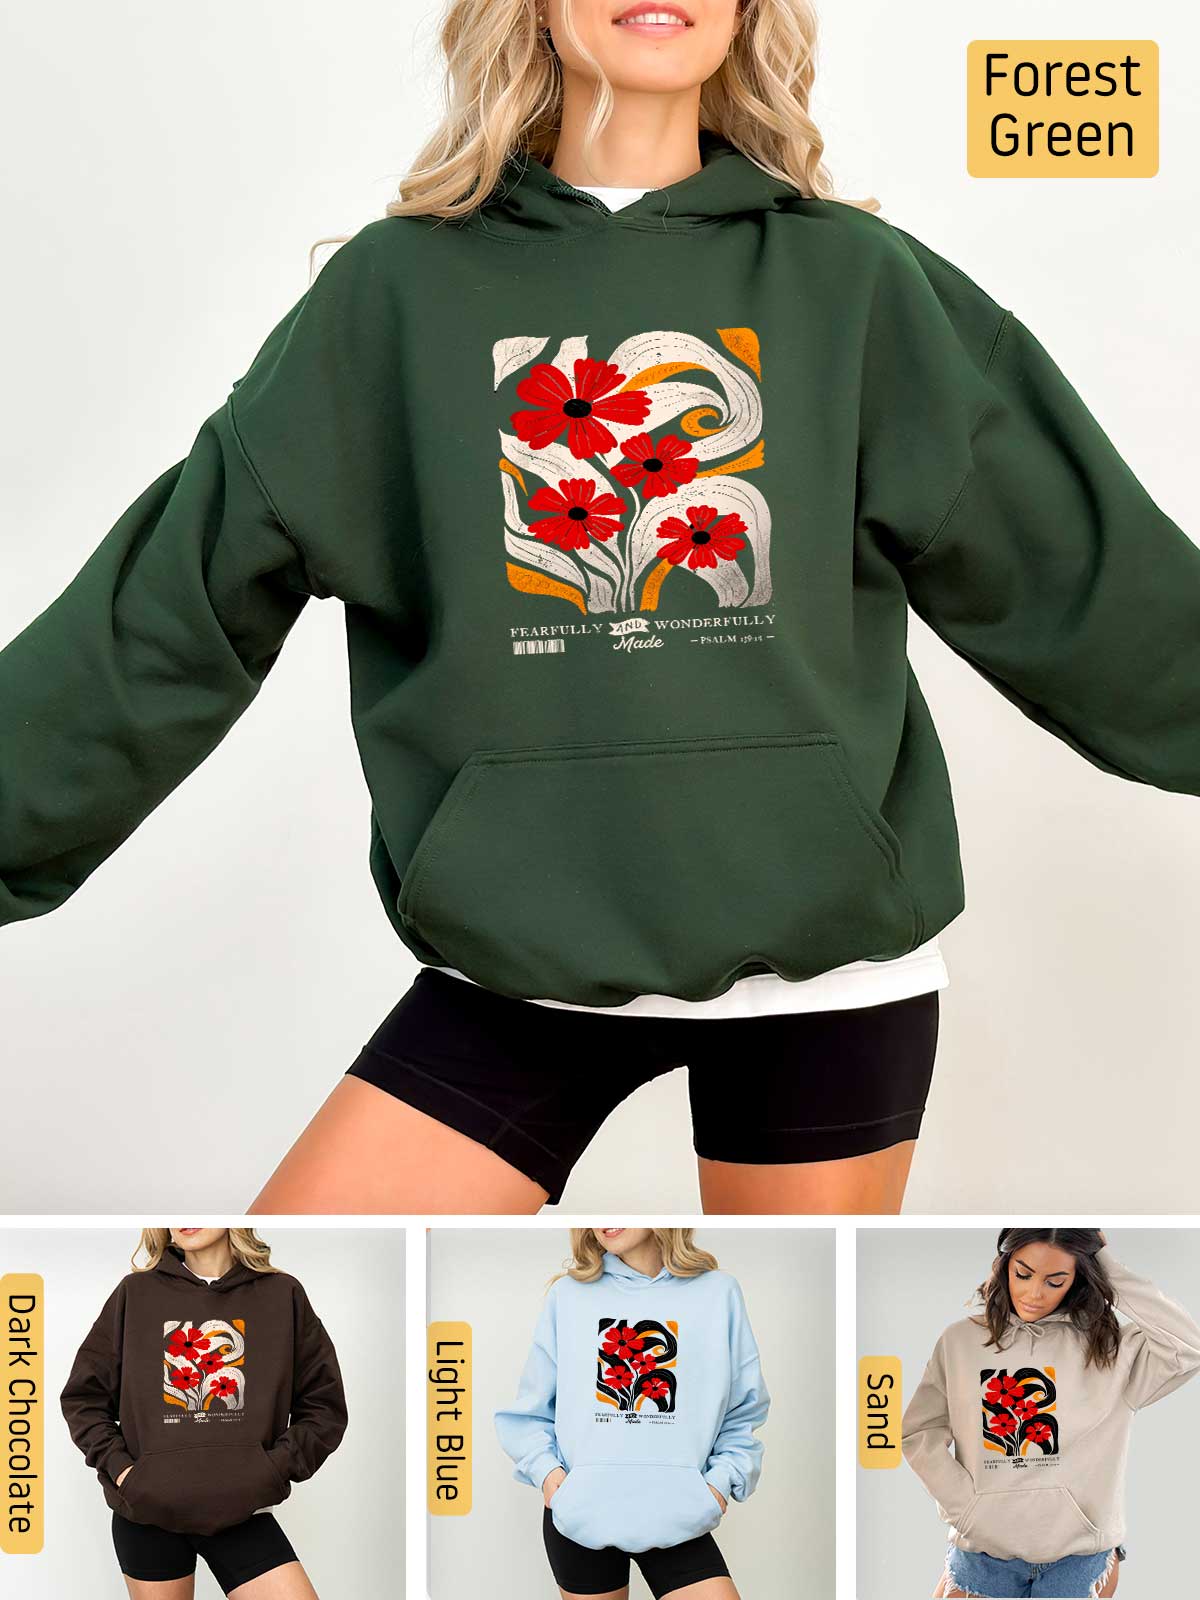 a woman wearing a green hoodie with red flowers on it